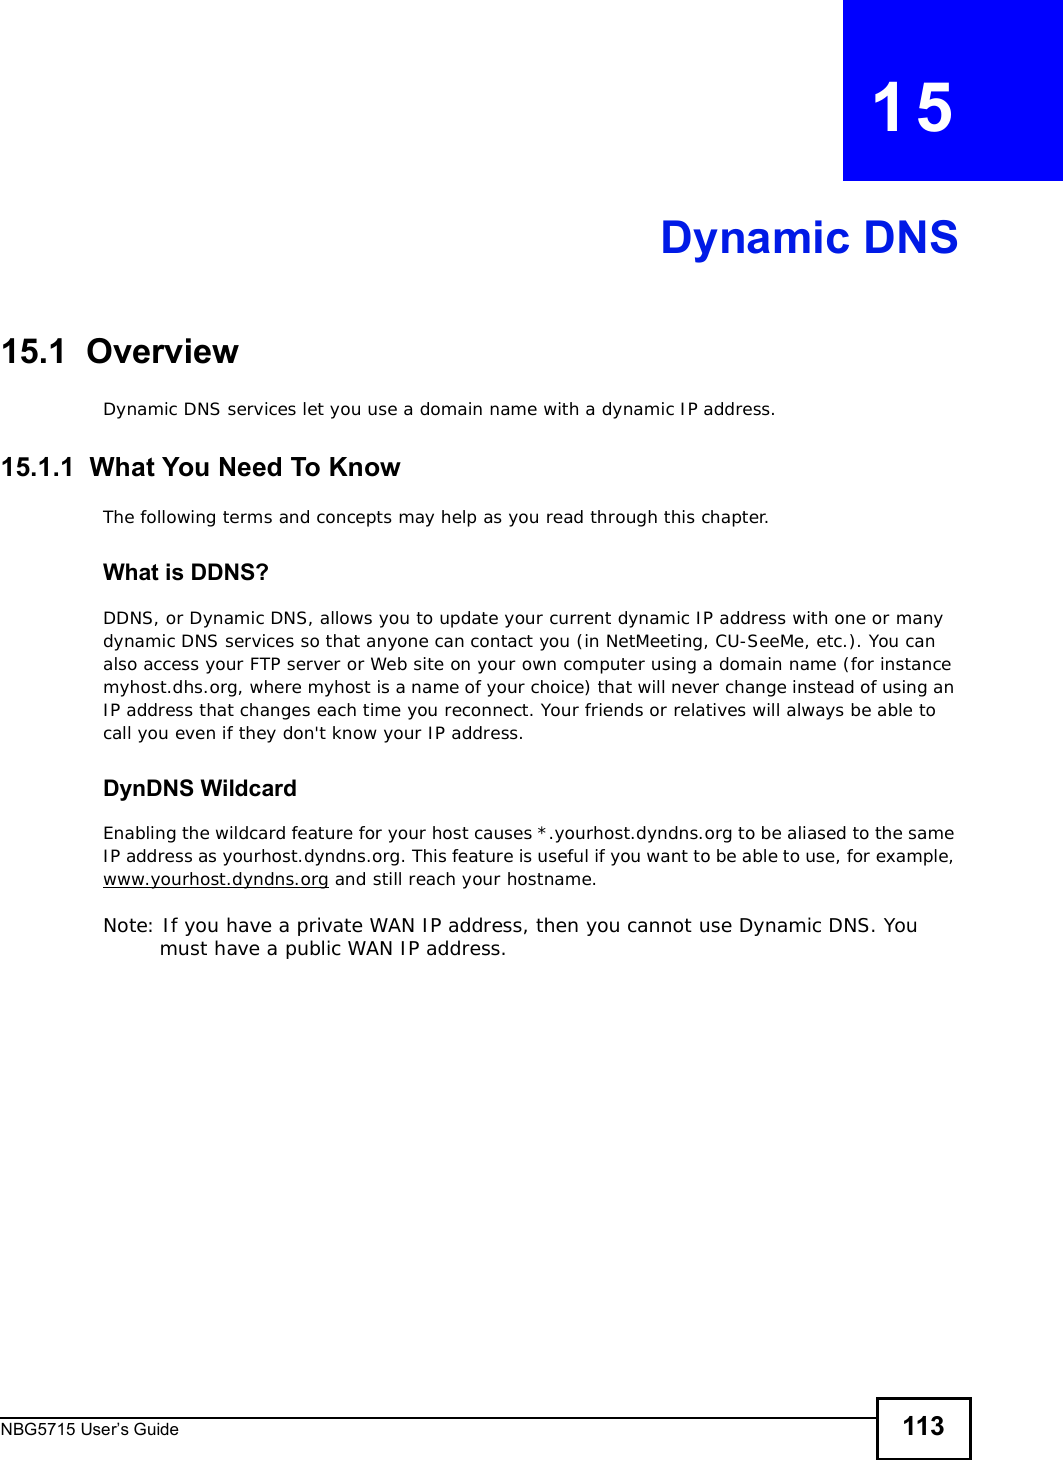 NBG5715 User’s Guide 113CHAPTER   15Dynamic DNS15.1  Overview Dynamic DNS services let you use a domain name with a dynamic IP address.15.1.1  What You Need To KnowThe following terms and concepts may help as you read through this chapter.What is DDNS?DDNS, or Dynamic DNS, allows you to update your current dynamic IP address with one or many dynamic DNS services so that anyone can contact you (in NetMeeting, CU-SeeMe, etc.). You can also access your FTP server or Web site on your own computer using a domain name (for instance myhost.dhs.org, where myhost is a name of your choice) that will never change instead of using an IP address that changes each time you reconnect. Your friends or relatives will always be able to call you even if they don&apos;t know your IP address.DynDNS Wildcard Enabling the wildcard feature for your host causes *.yourhost.dyndns.org to be aliased to the same IP address as yourhost.dyndns.org. This feature is useful if you want to be able to use, for example, www.yourhost.dyndns.org and still reach your hostname.Note: If you have a private WAN IP address, then you cannot use Dynamic DNS. You must have a public WAN IP address.